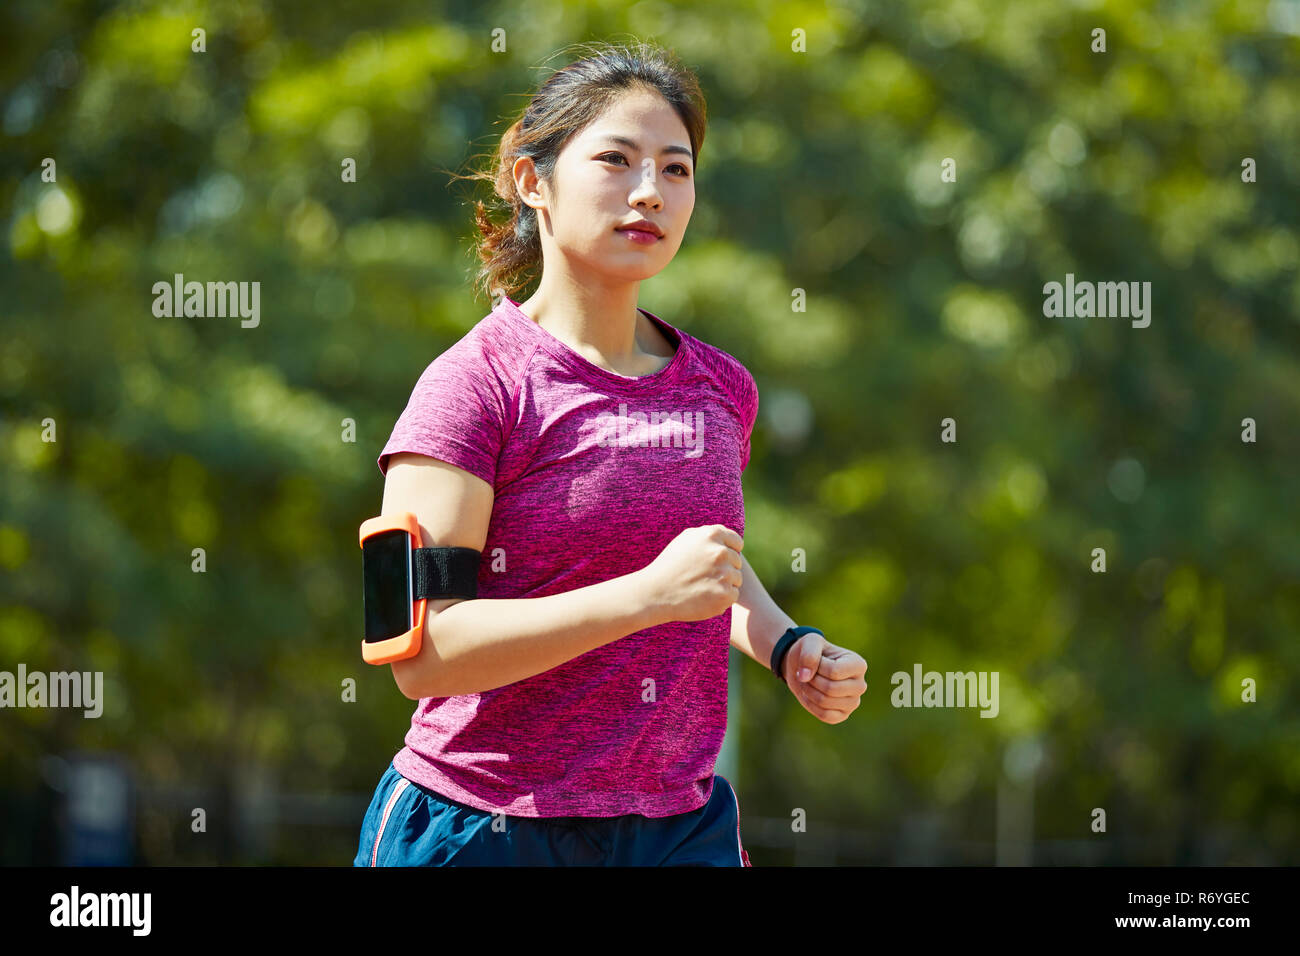 young asian woman track and field athlete running Stock Photo